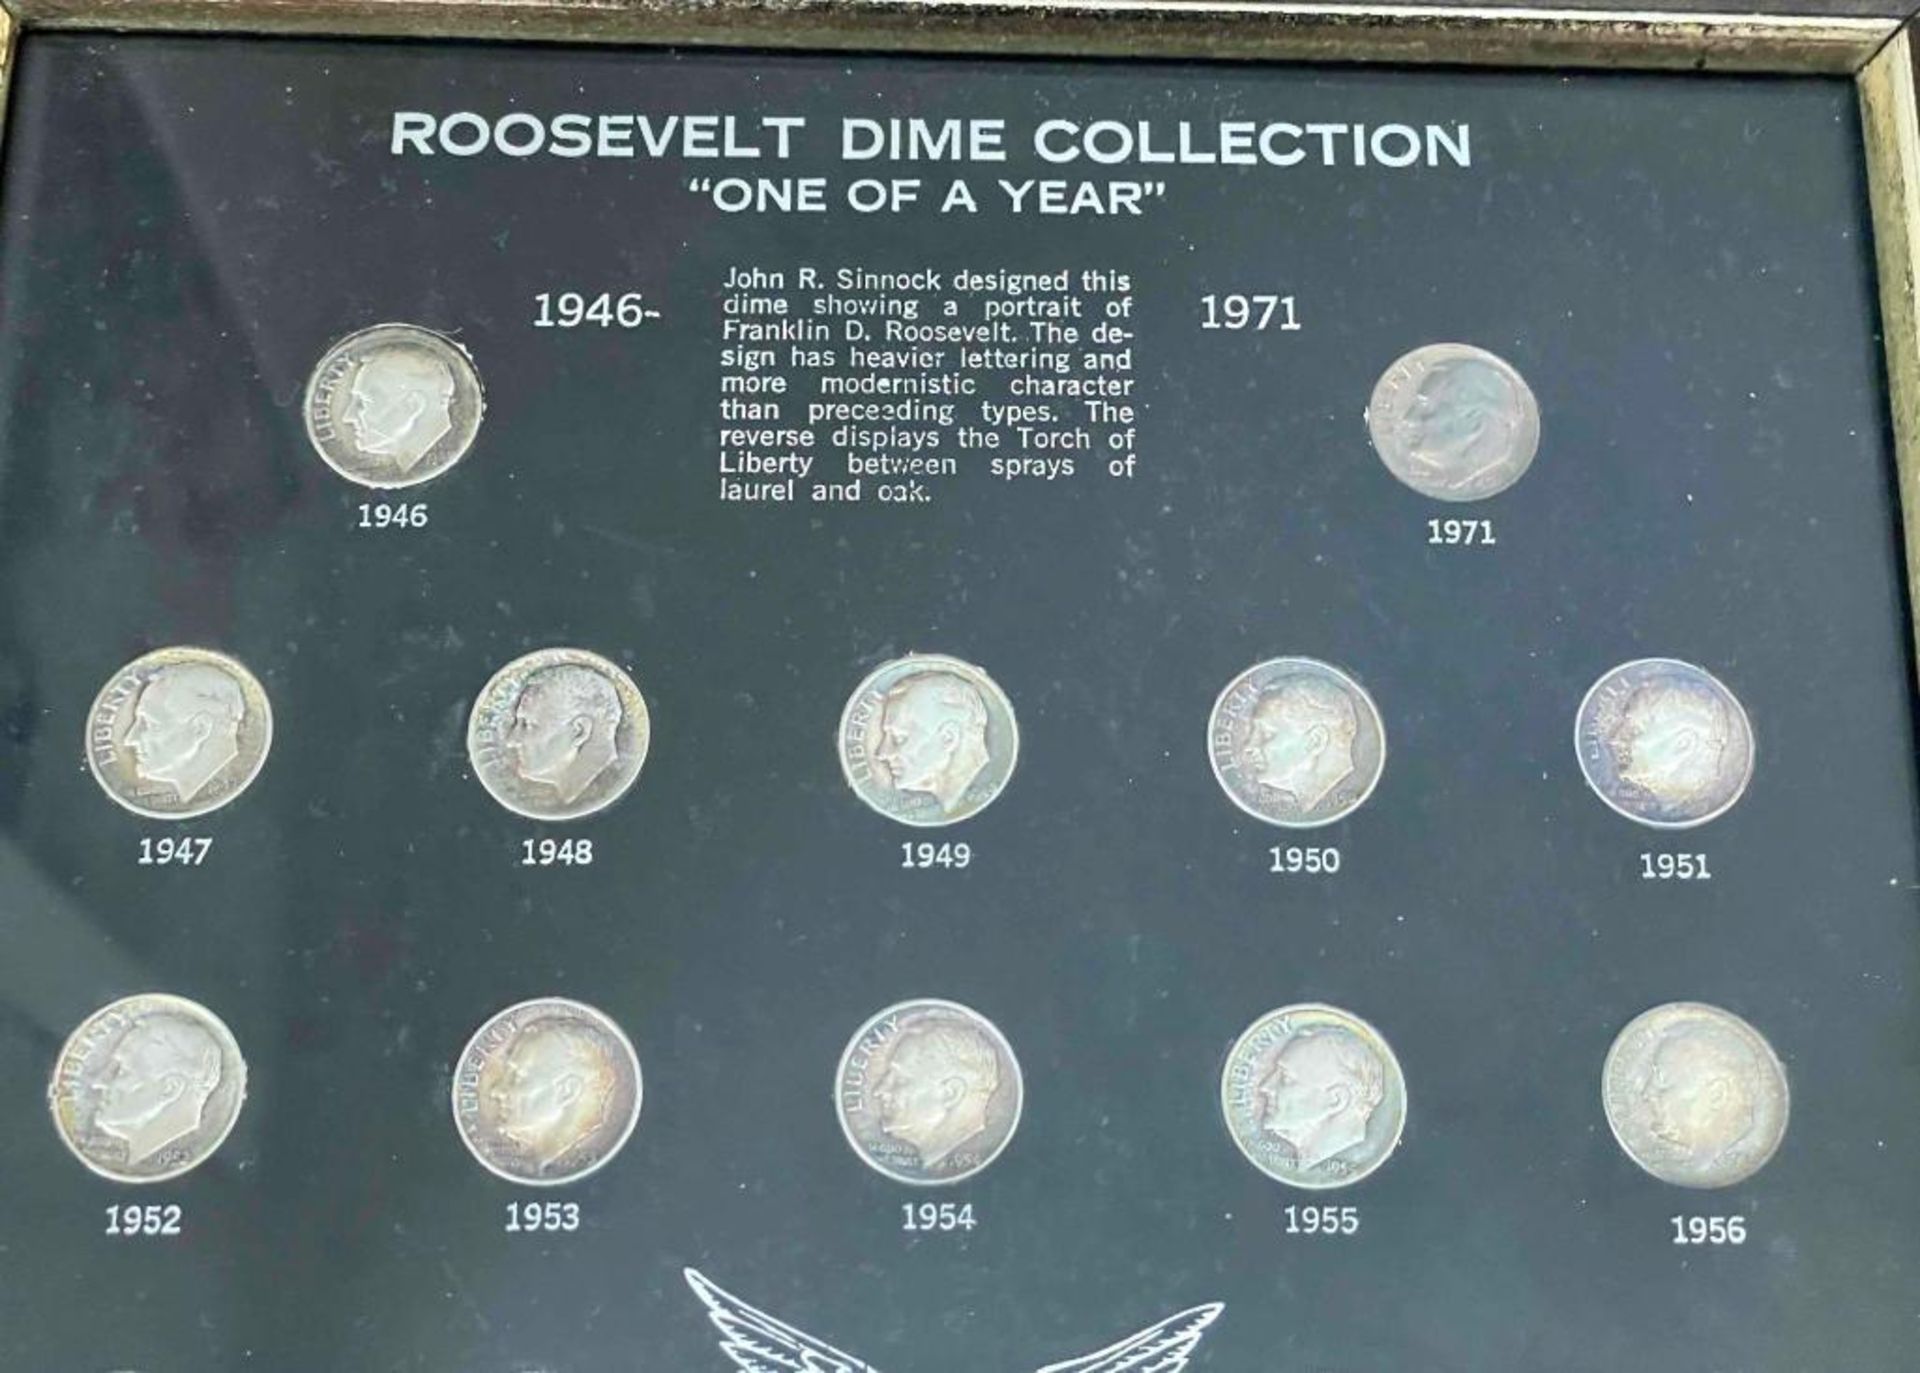 Roosevelt Dime Collection 1946-1971, mostly silver - Image 3 of 5